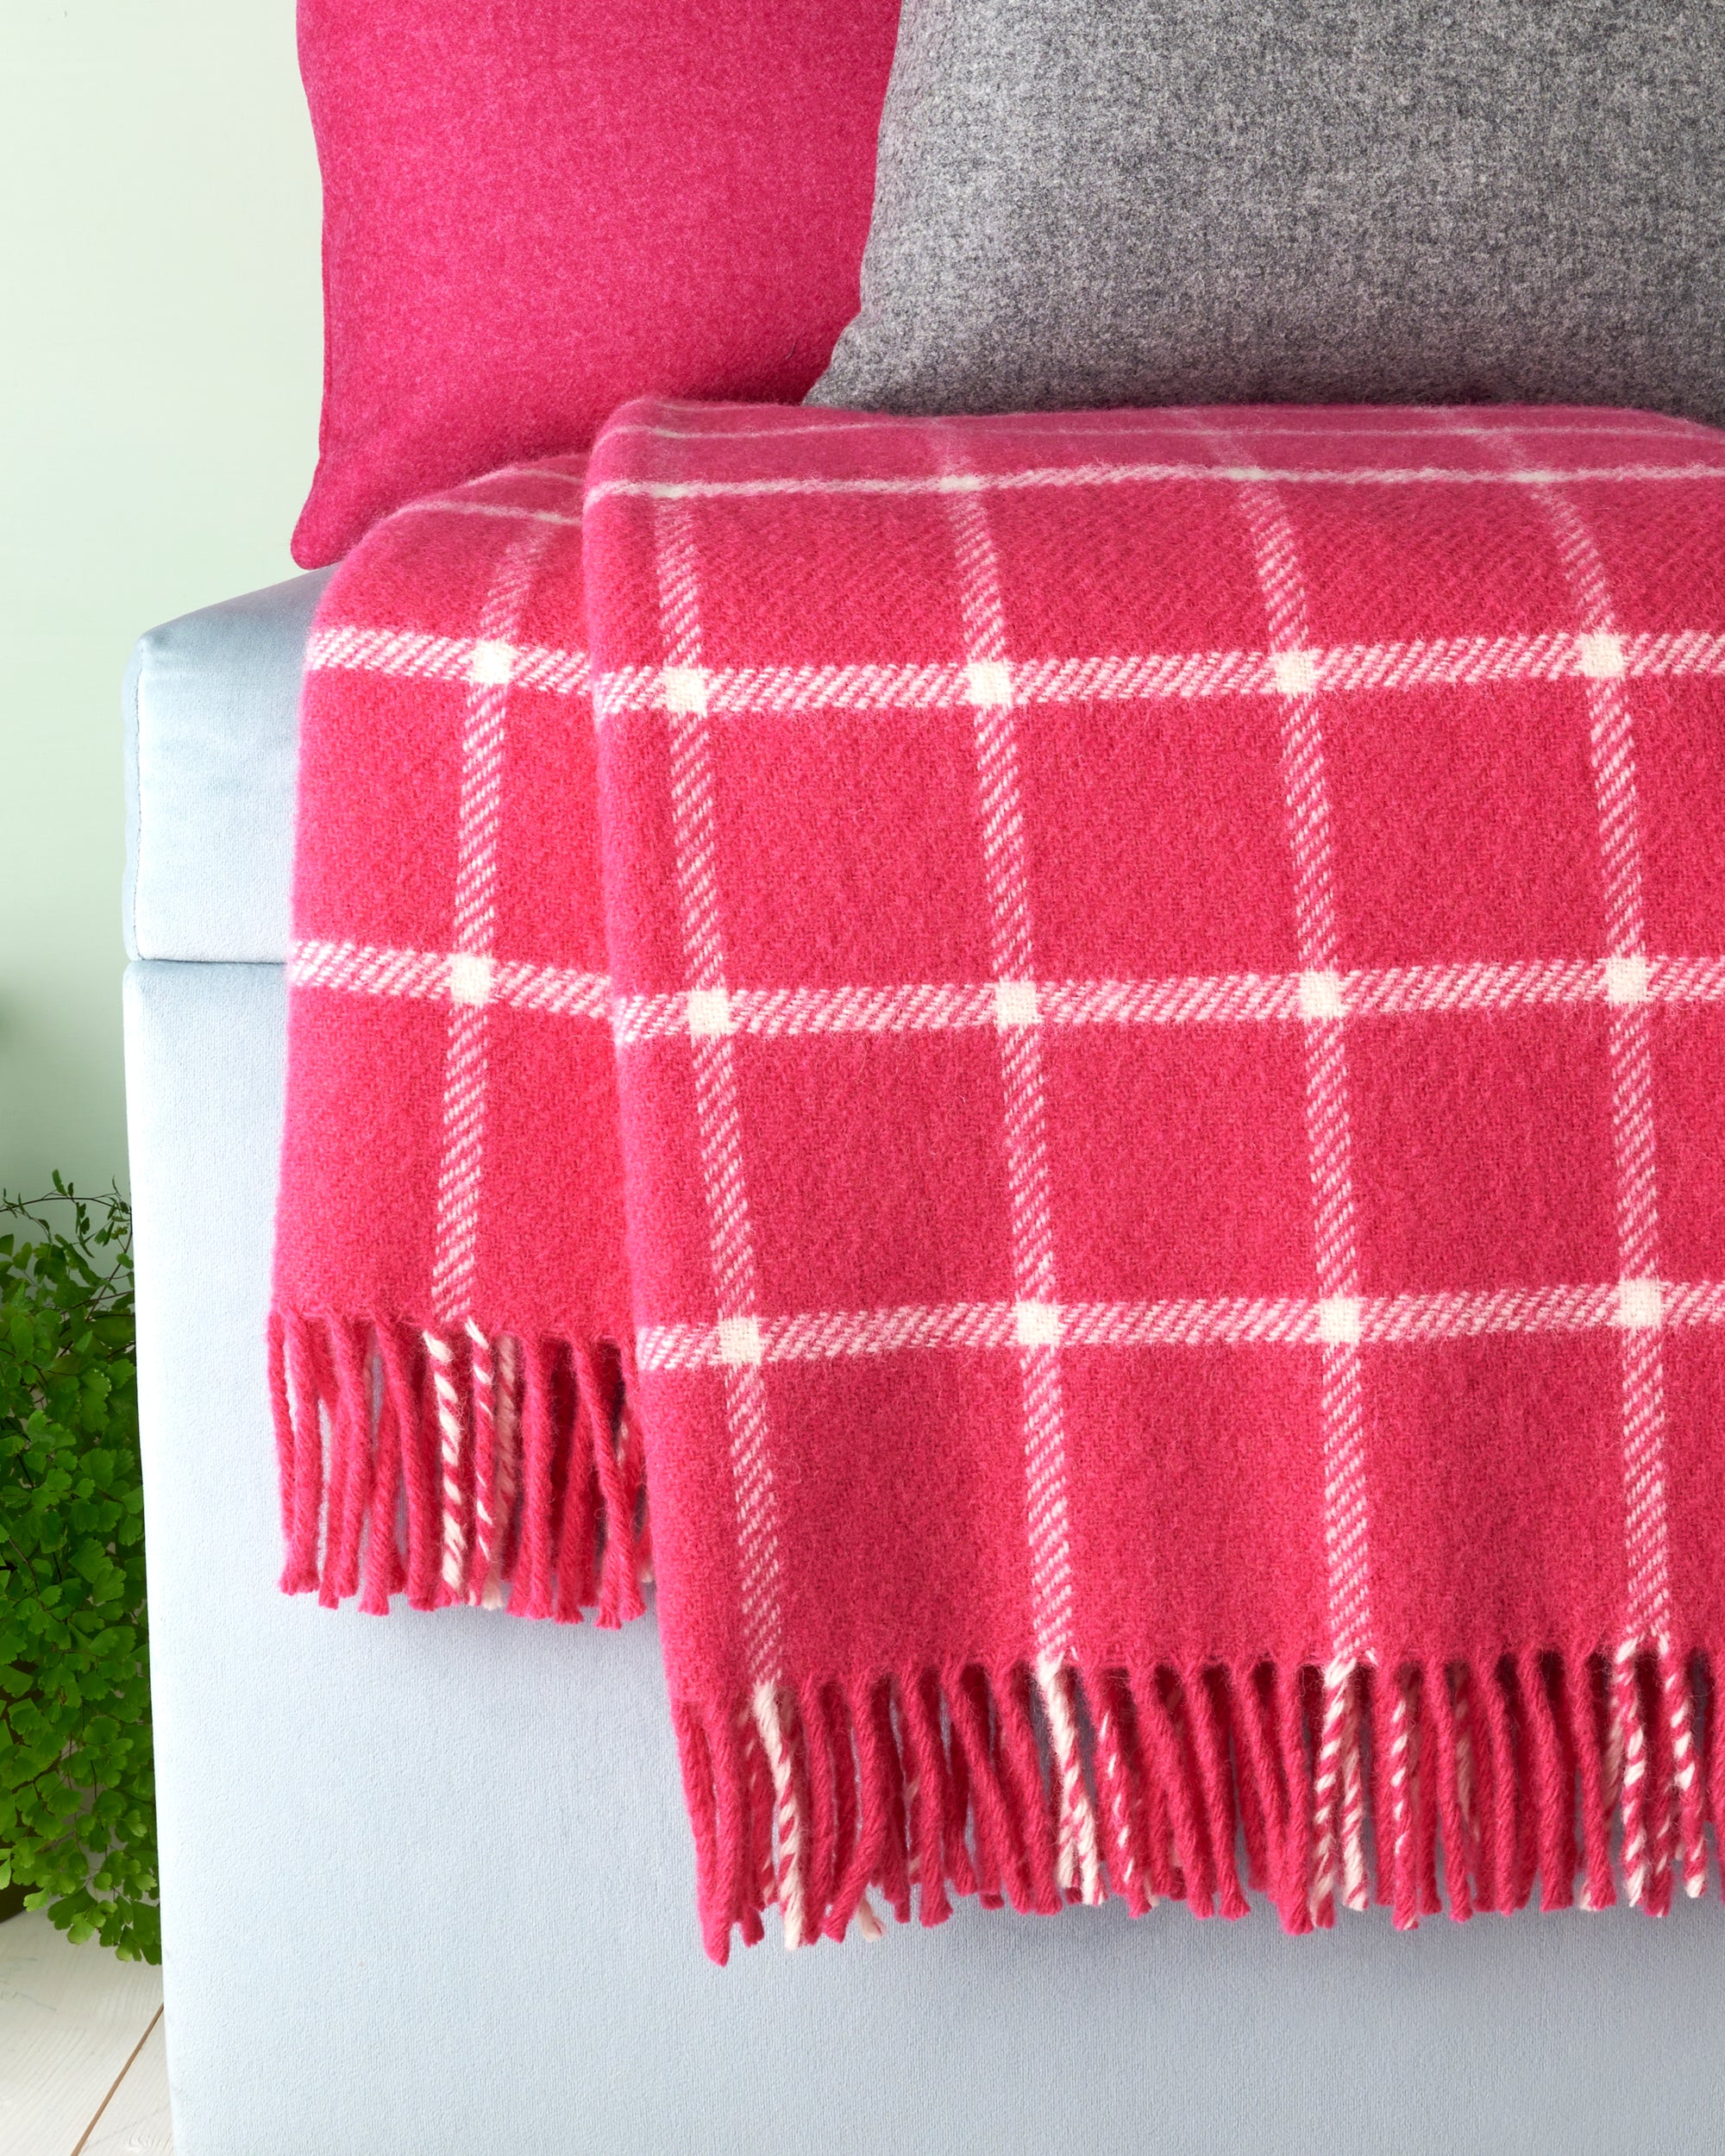 Tweedmill Chequered Check Pink Wool Blanket Throw